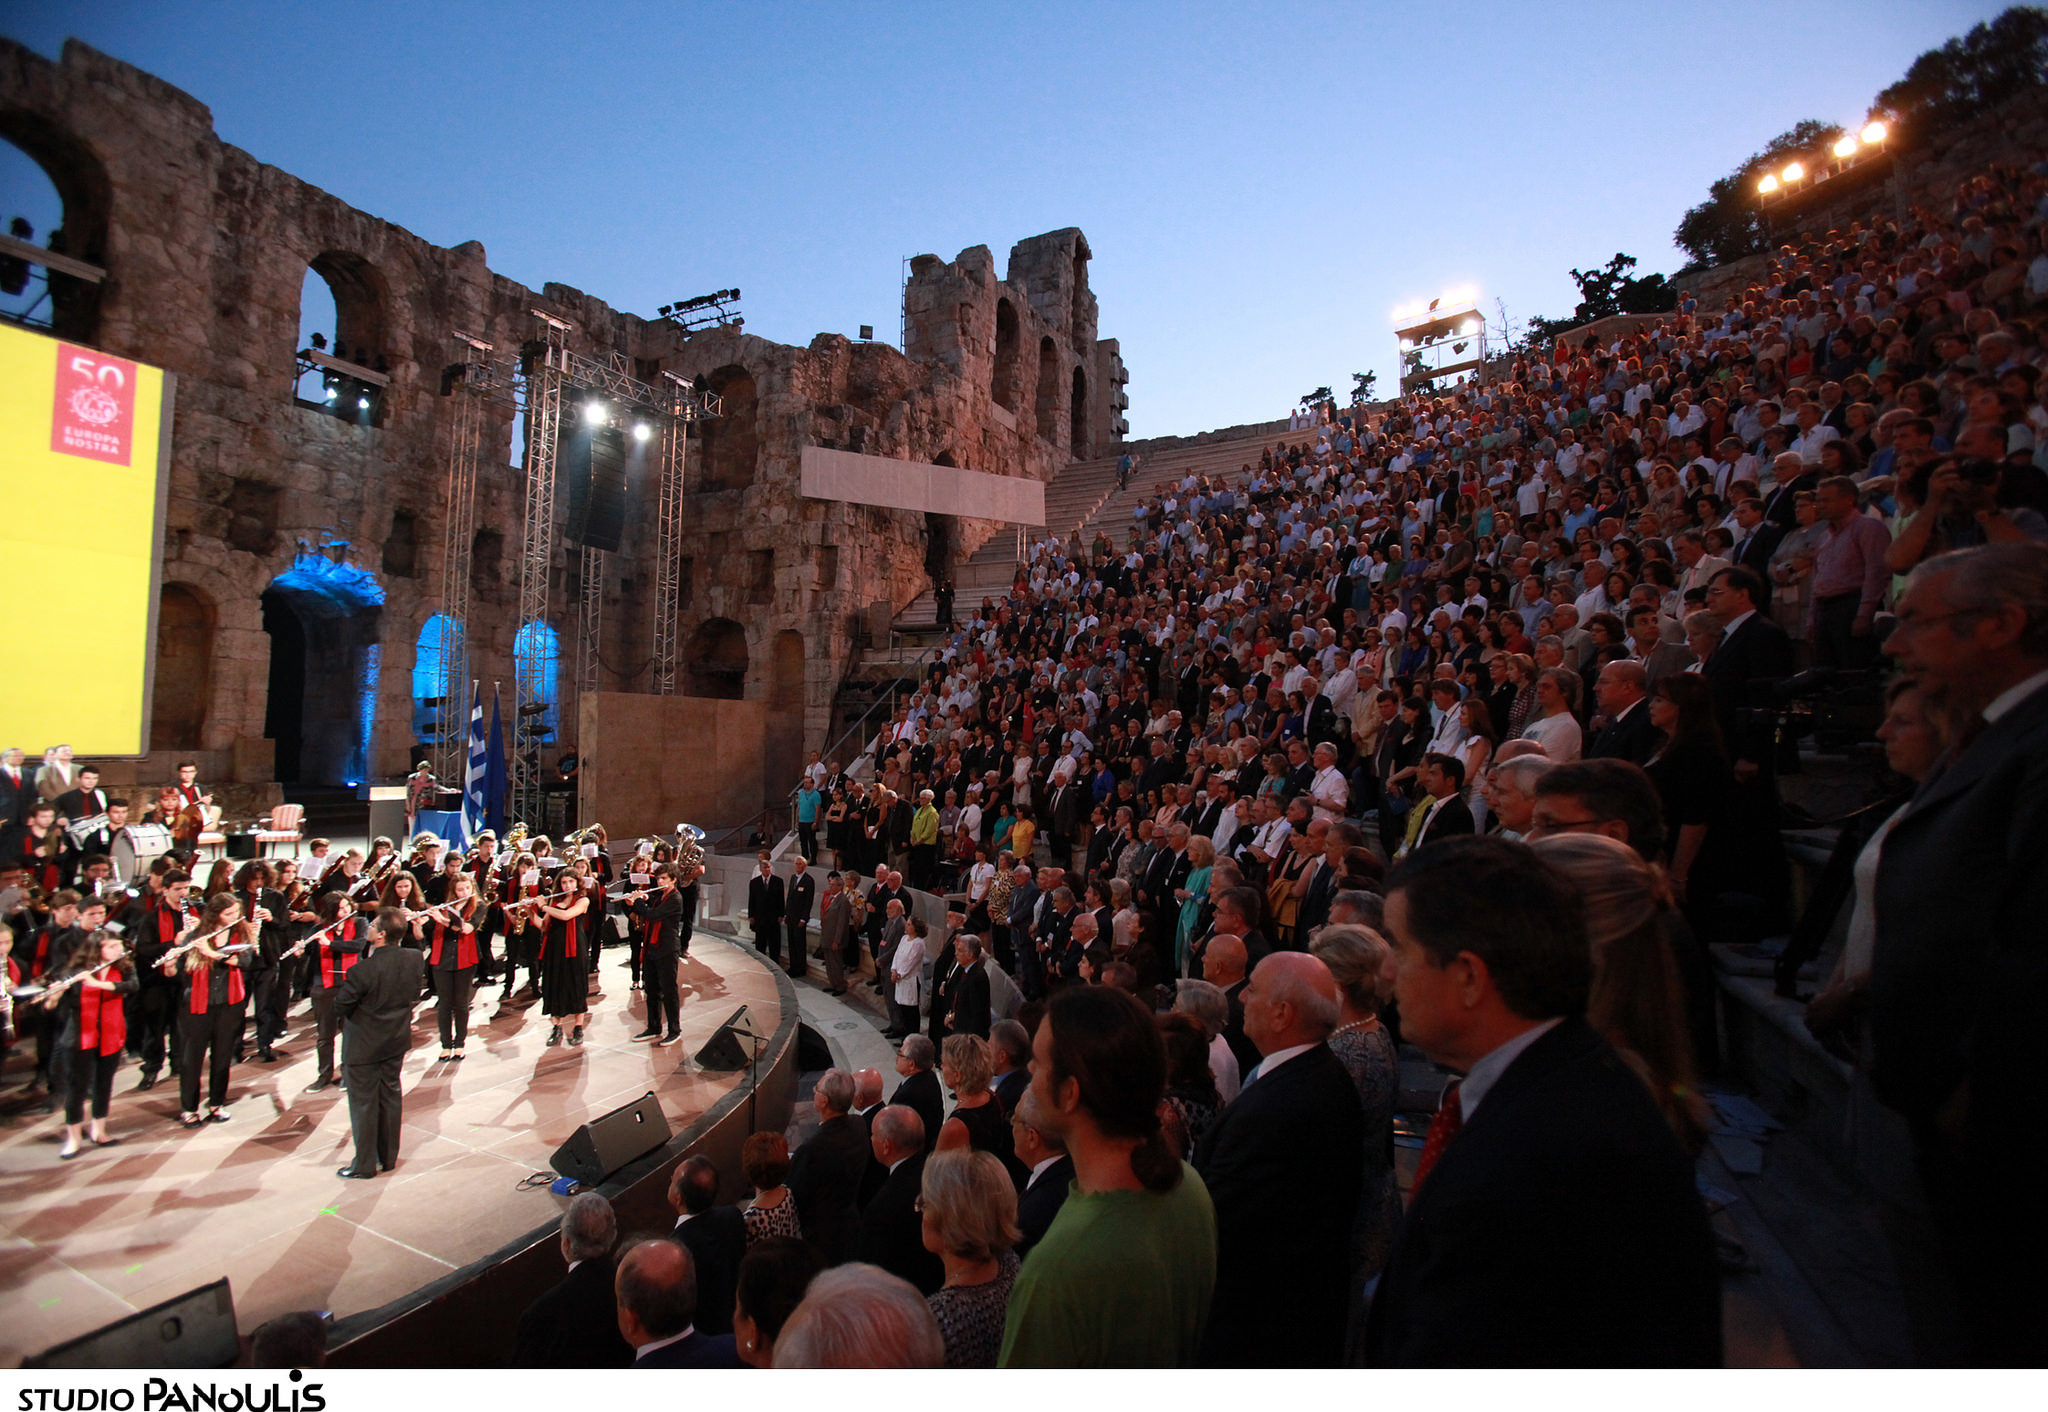 Photo: The European Heritage Awards Ceremony on 16 June 2013 at the Odeon of Herodes Atticus in Athens was attended by some 4.000 people. © Studio Panoulis